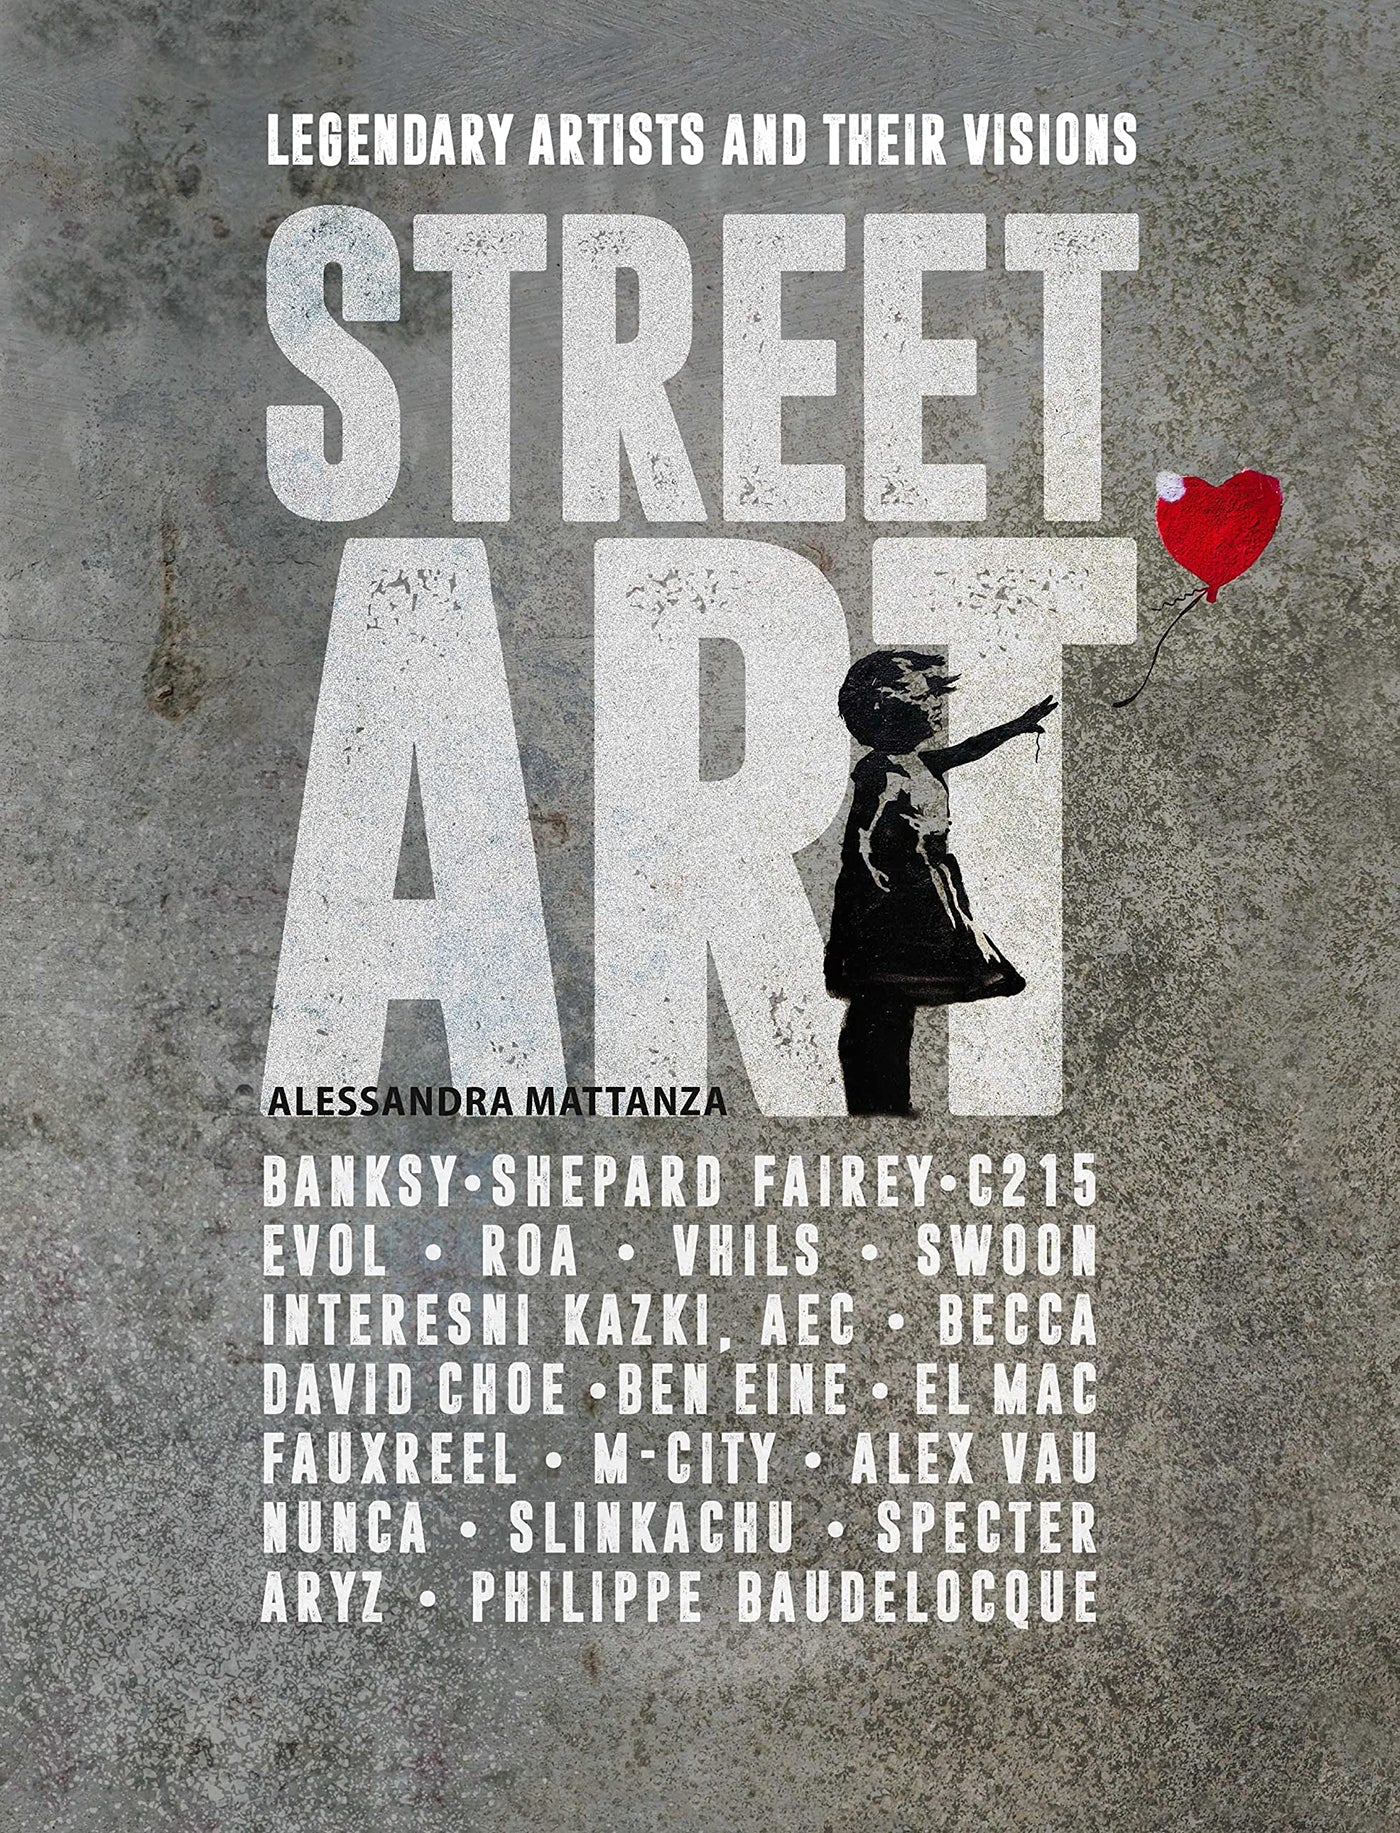 Alessandra Mattanza | BUY FROM AMAZON English Edition - Street Art: Famous Artists Talk About Their Vision